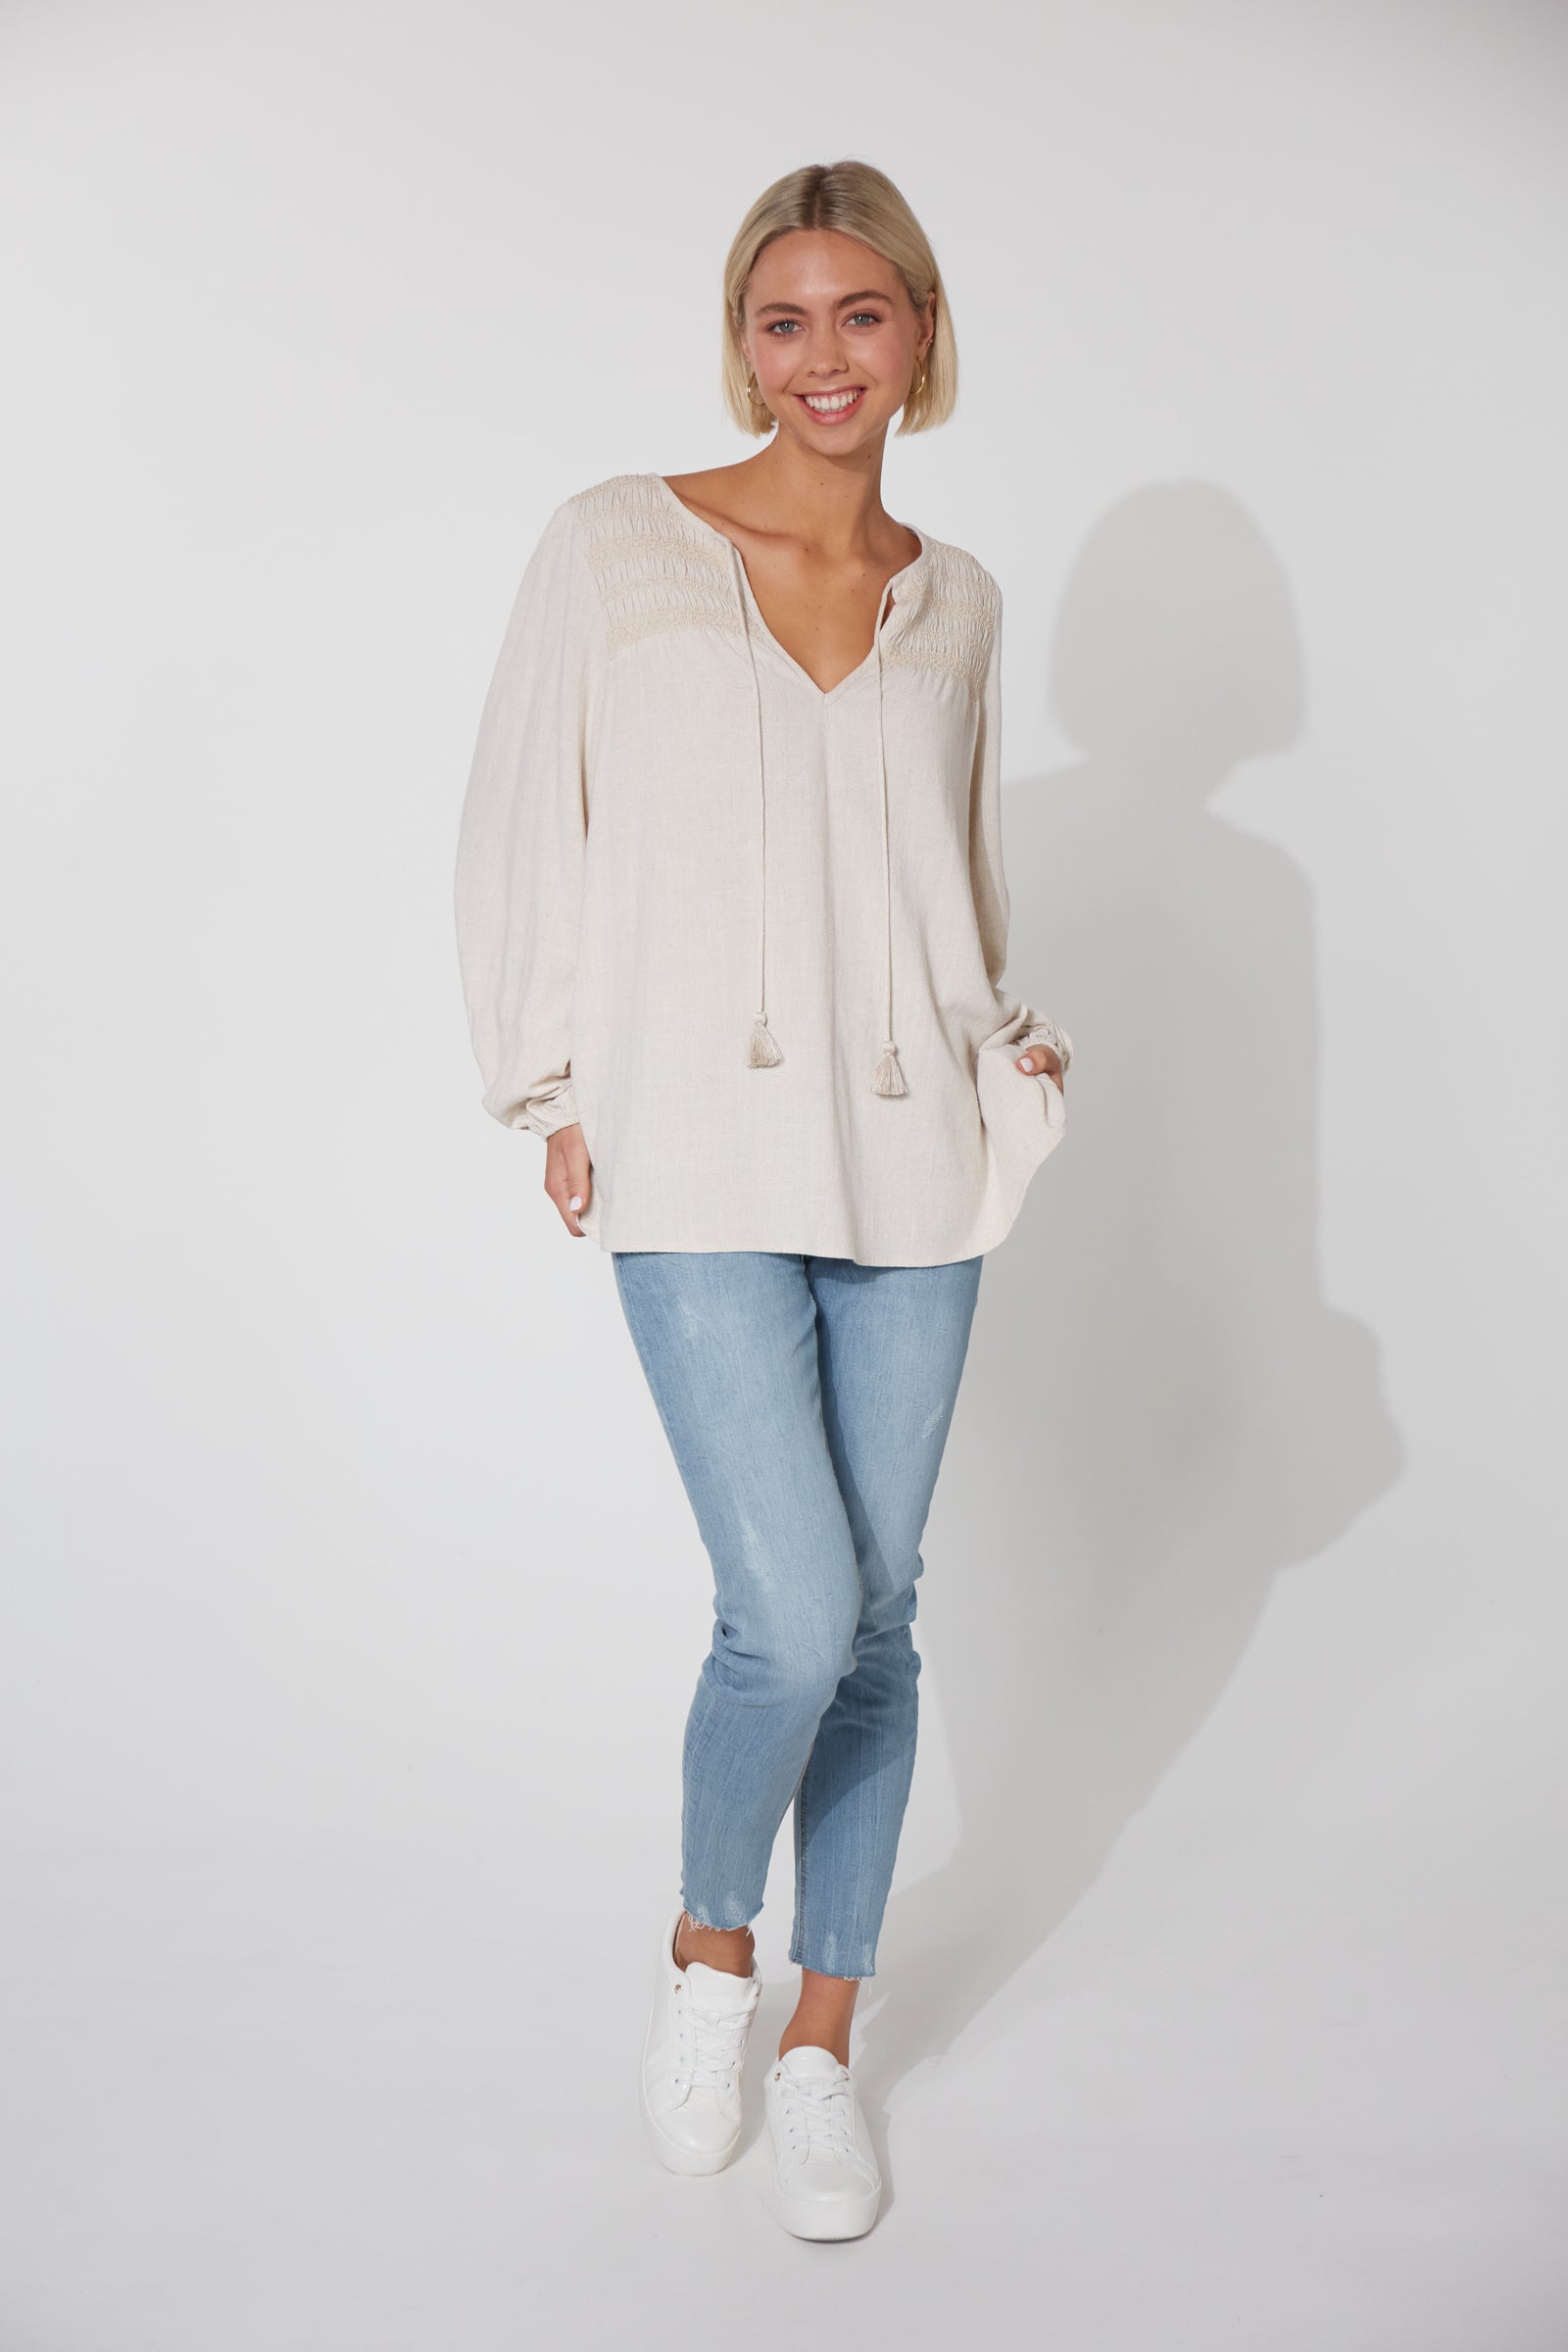 Lauder Blouse - Flax-Tops-Haven-The Bay Room